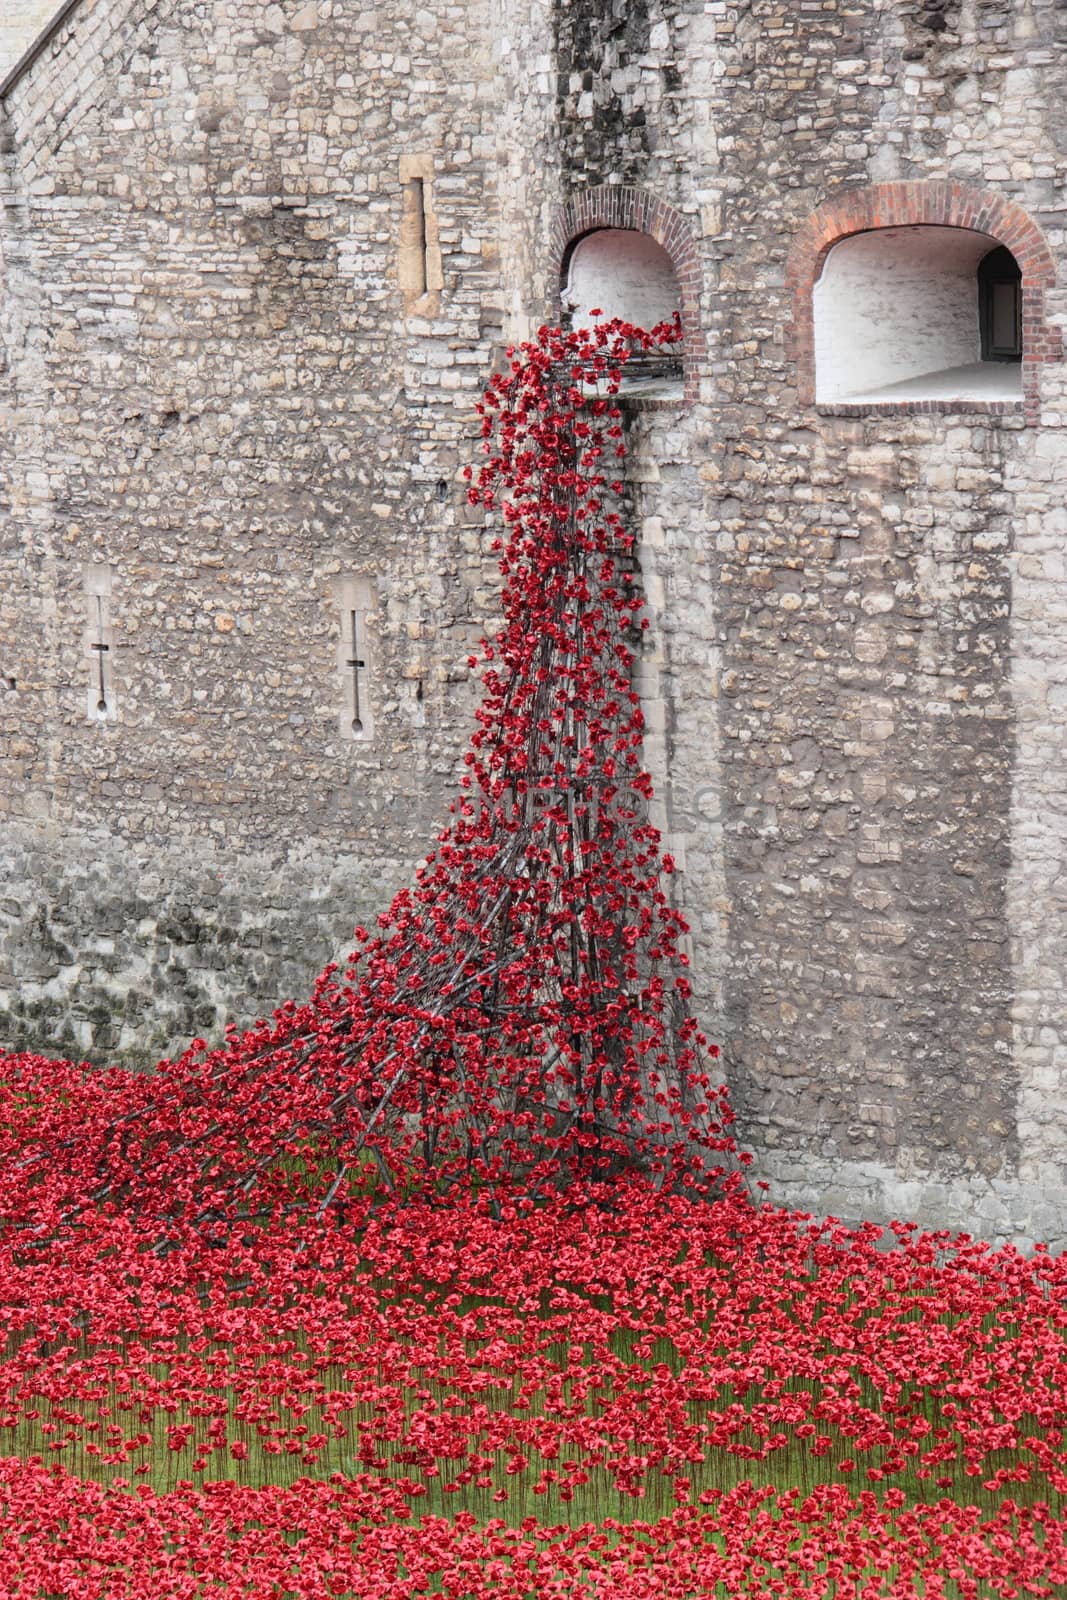 Poppies at The Tower of London London UK